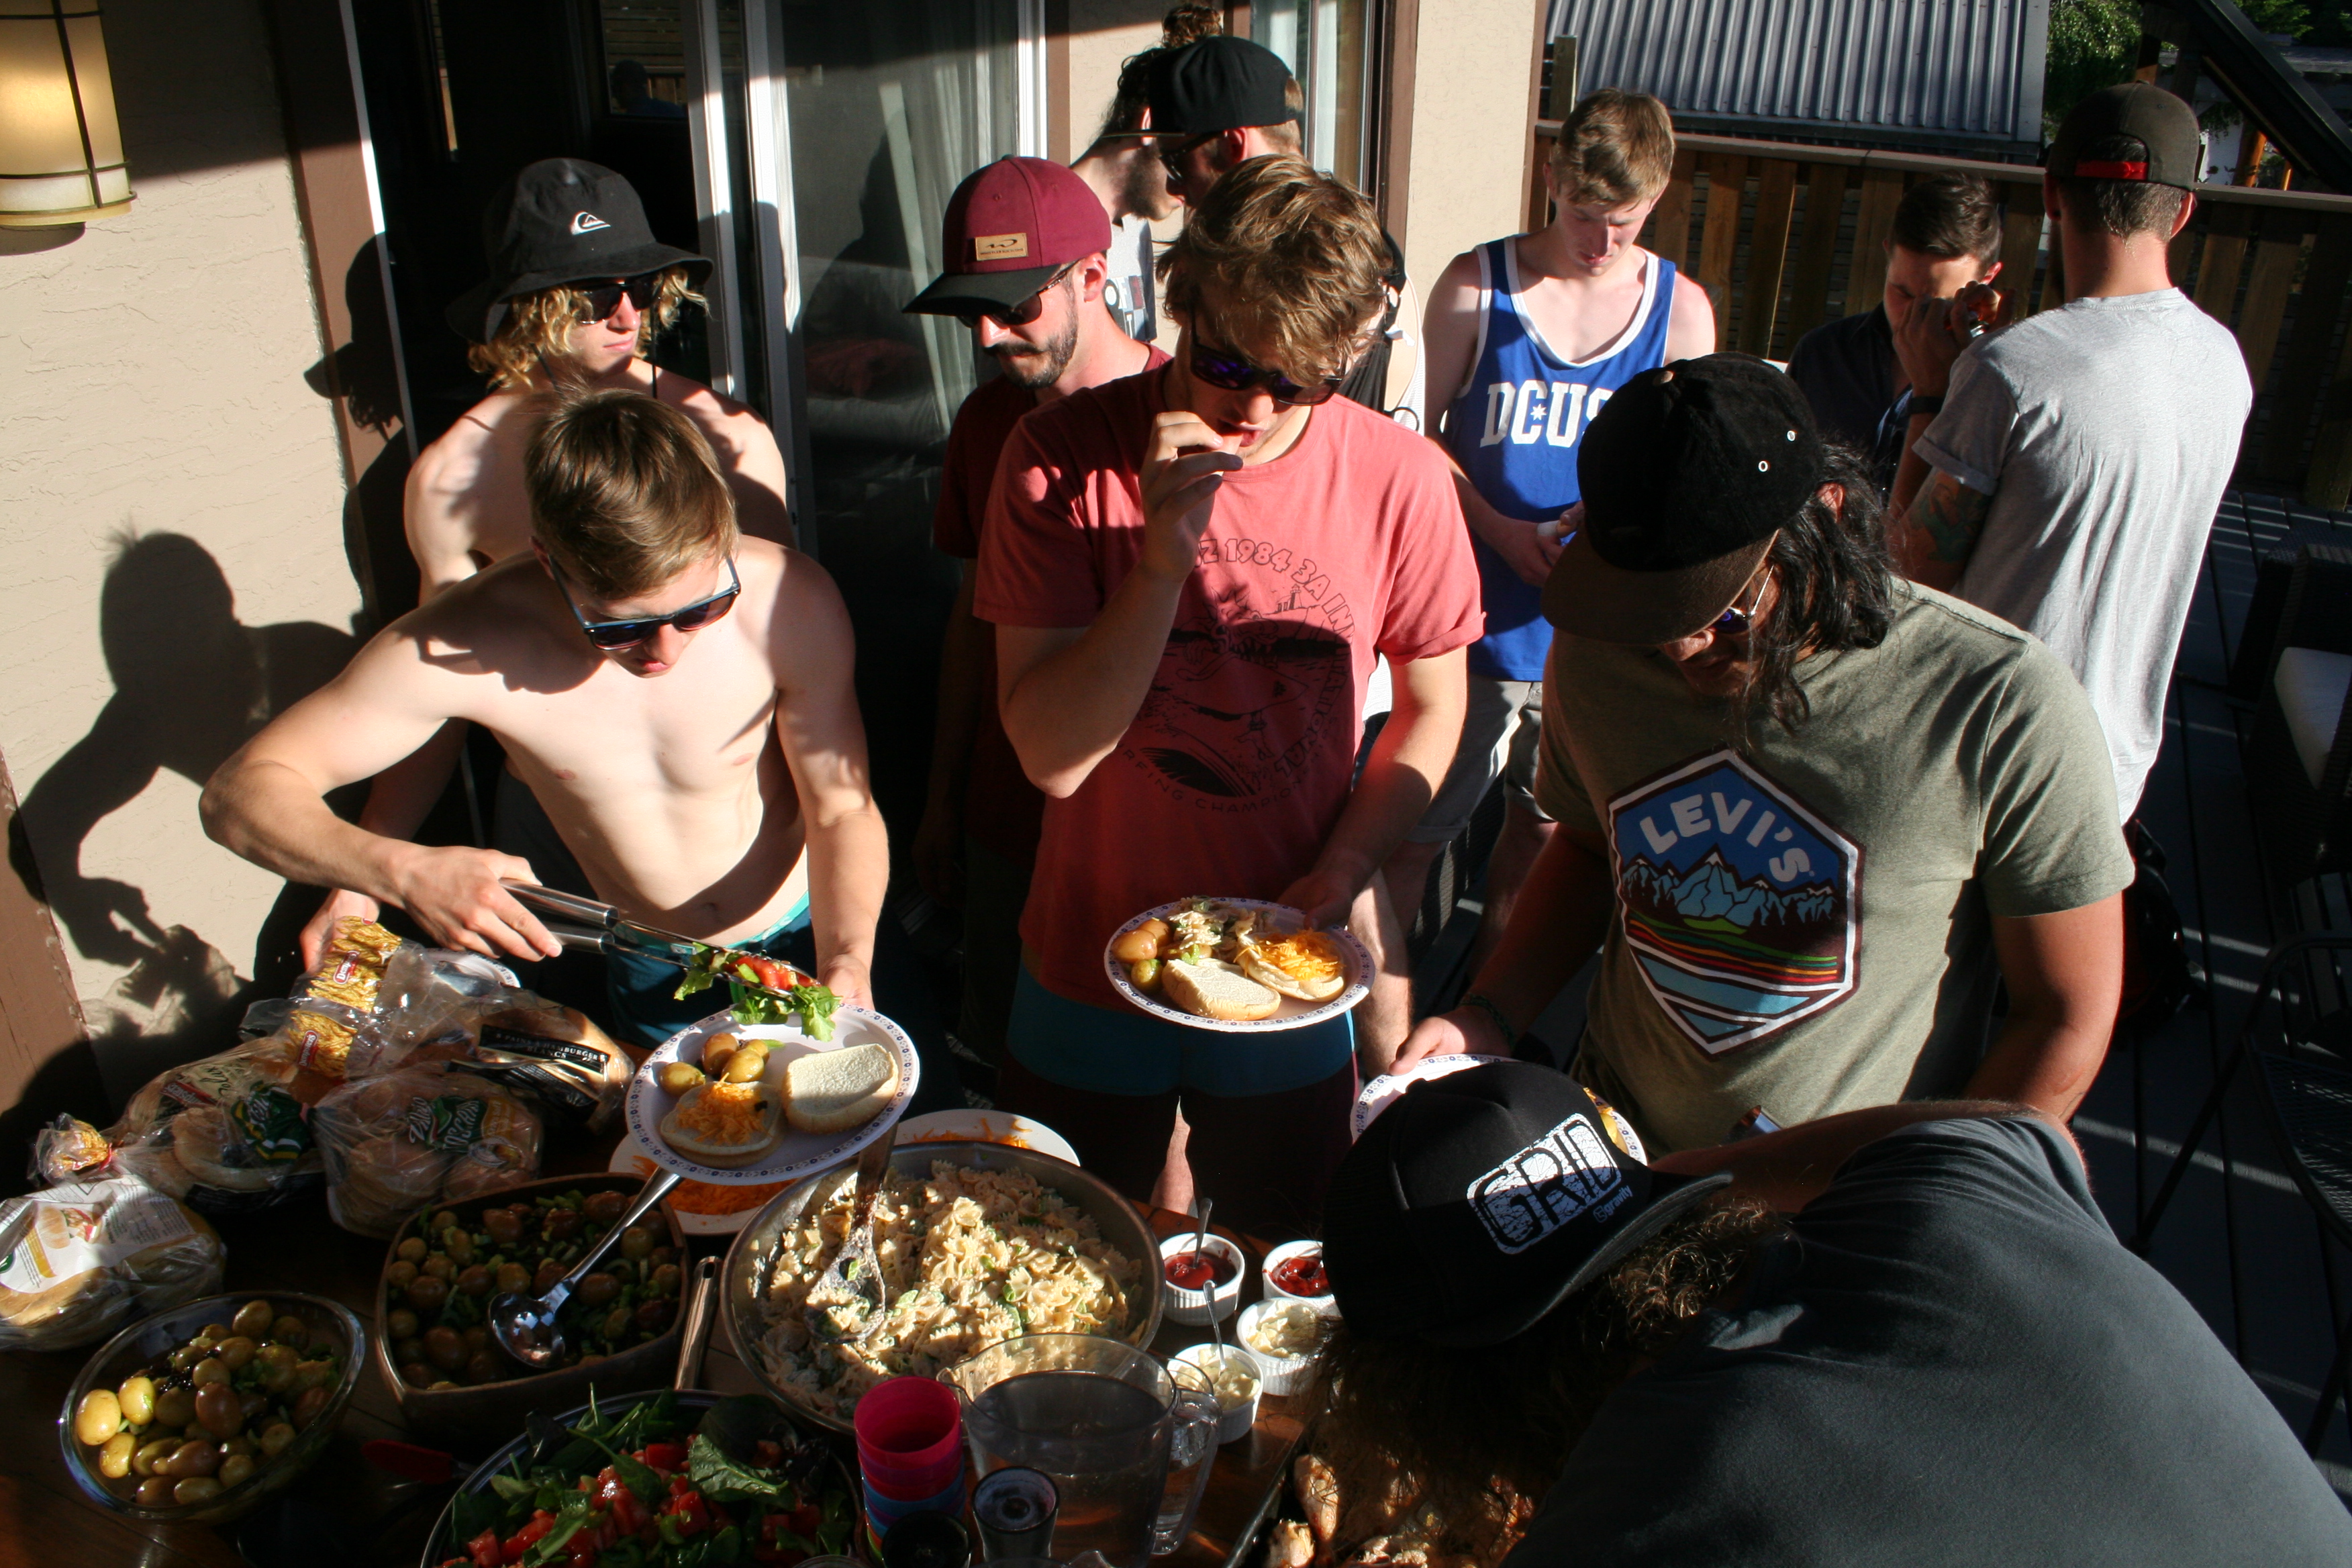 All the BBQ trimmings you could ask for, the trainees enjoy a meat feast on the patio